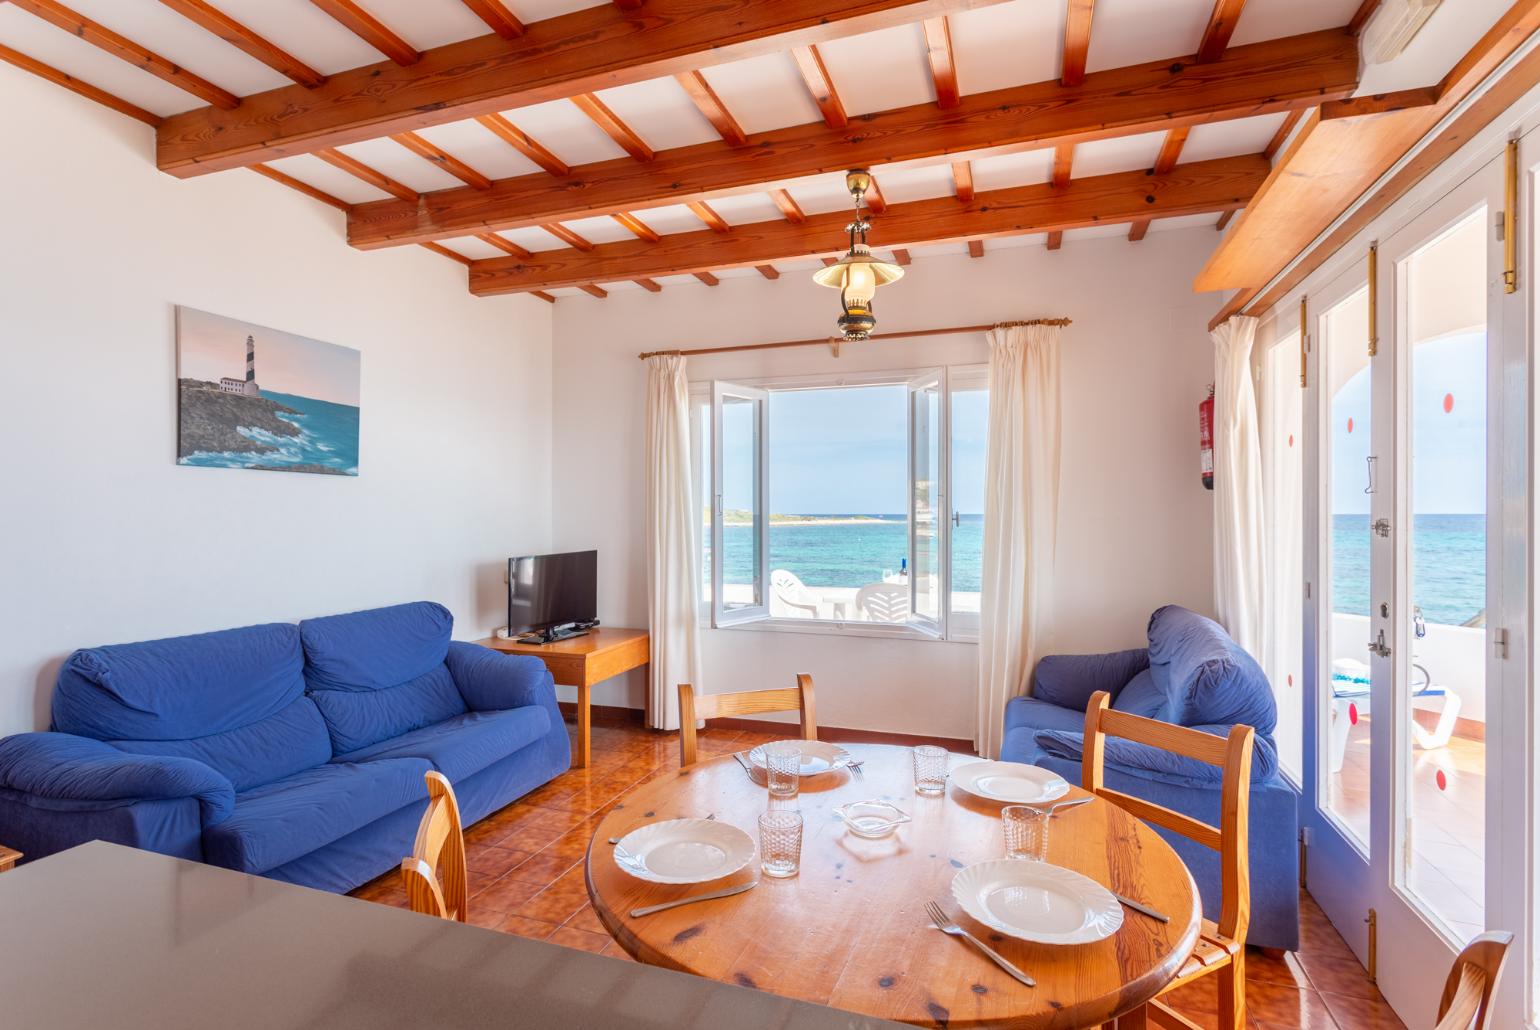 Open-plan living room with sofas, dining area, kitchen, WiFi internet, TV, and sea views